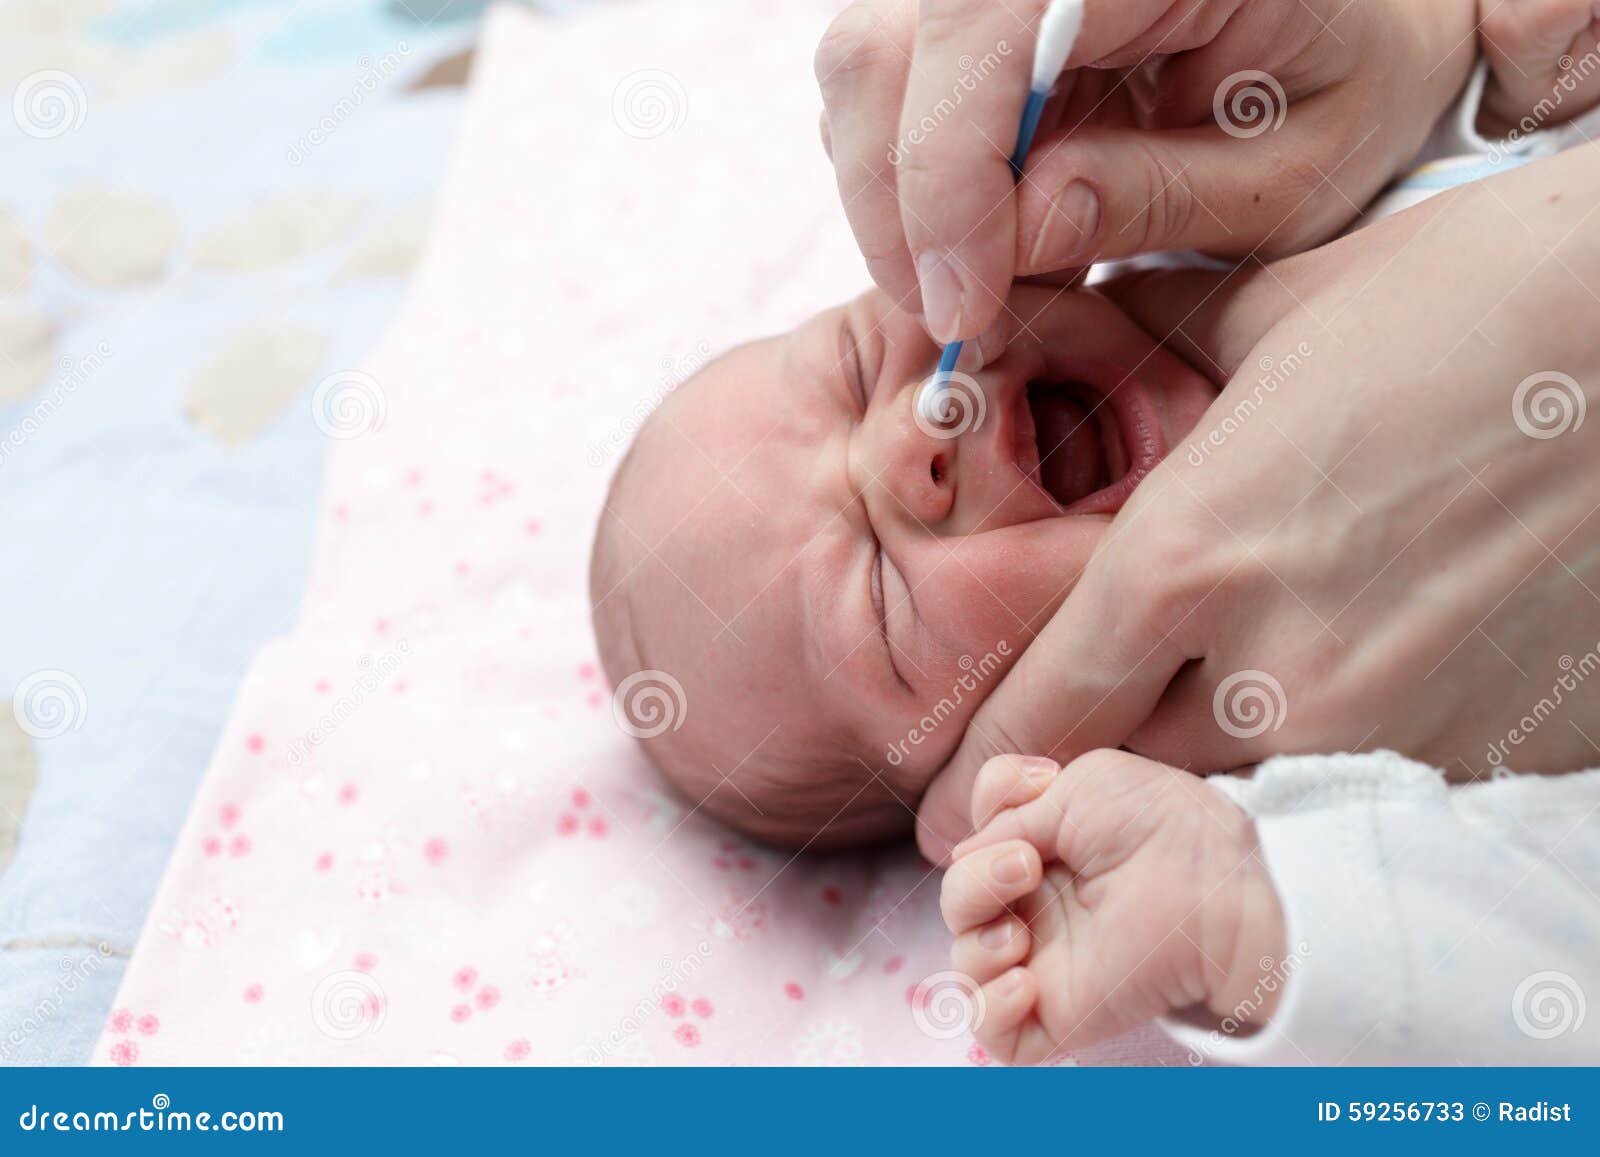 Clean baby nose stock image. Image of clean, months, parent - 30503519